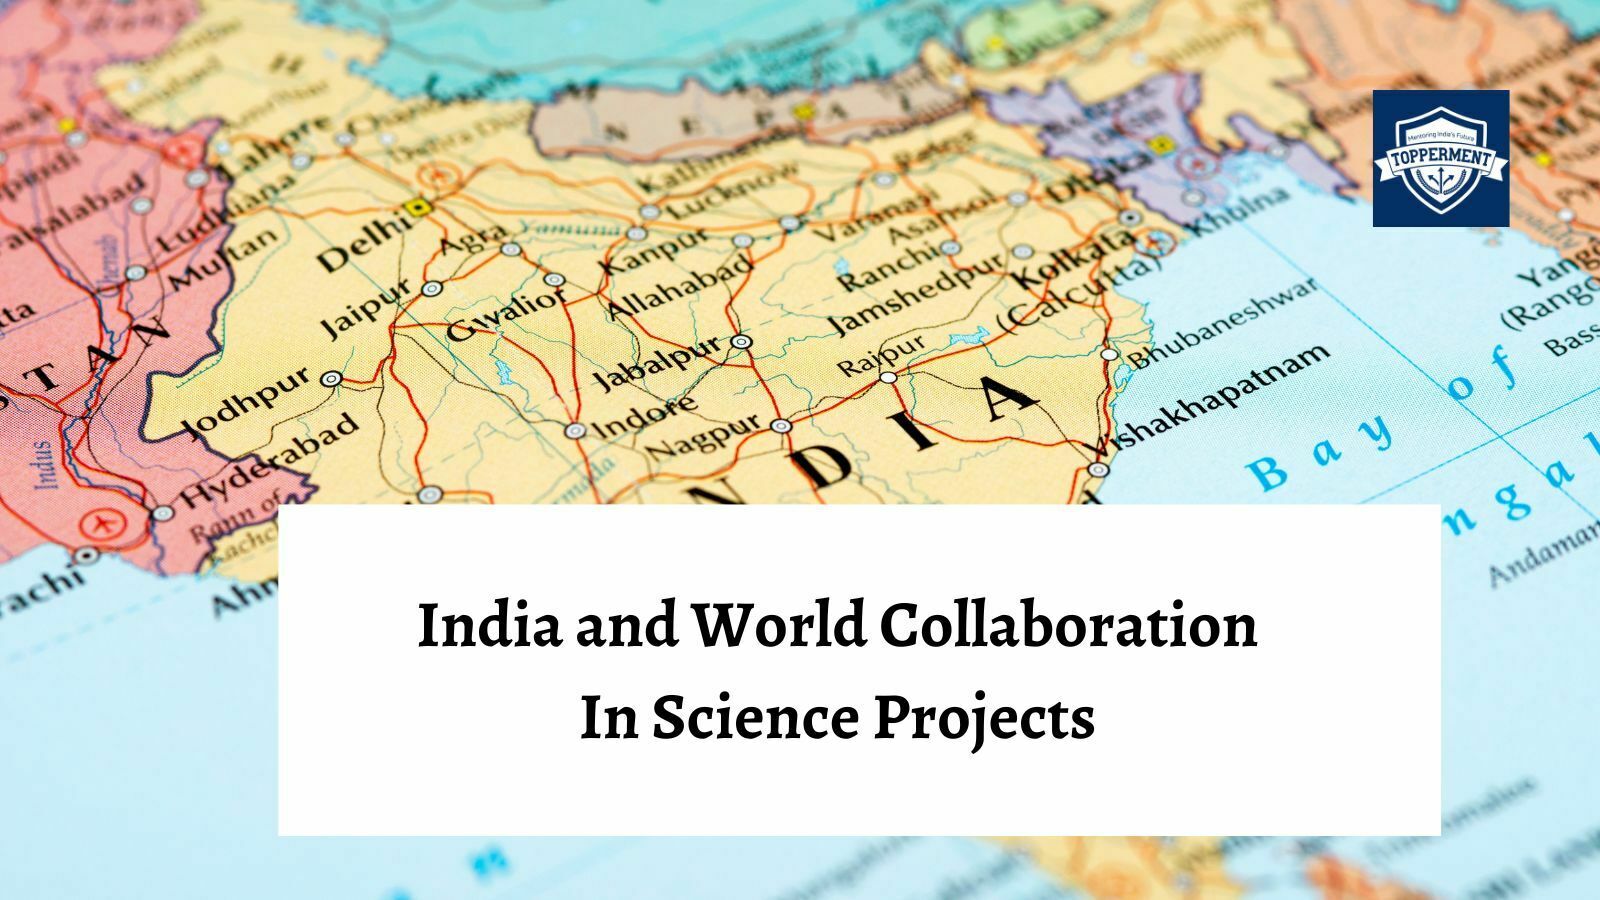 India and World Collaborations in Science Projects-TopperMent